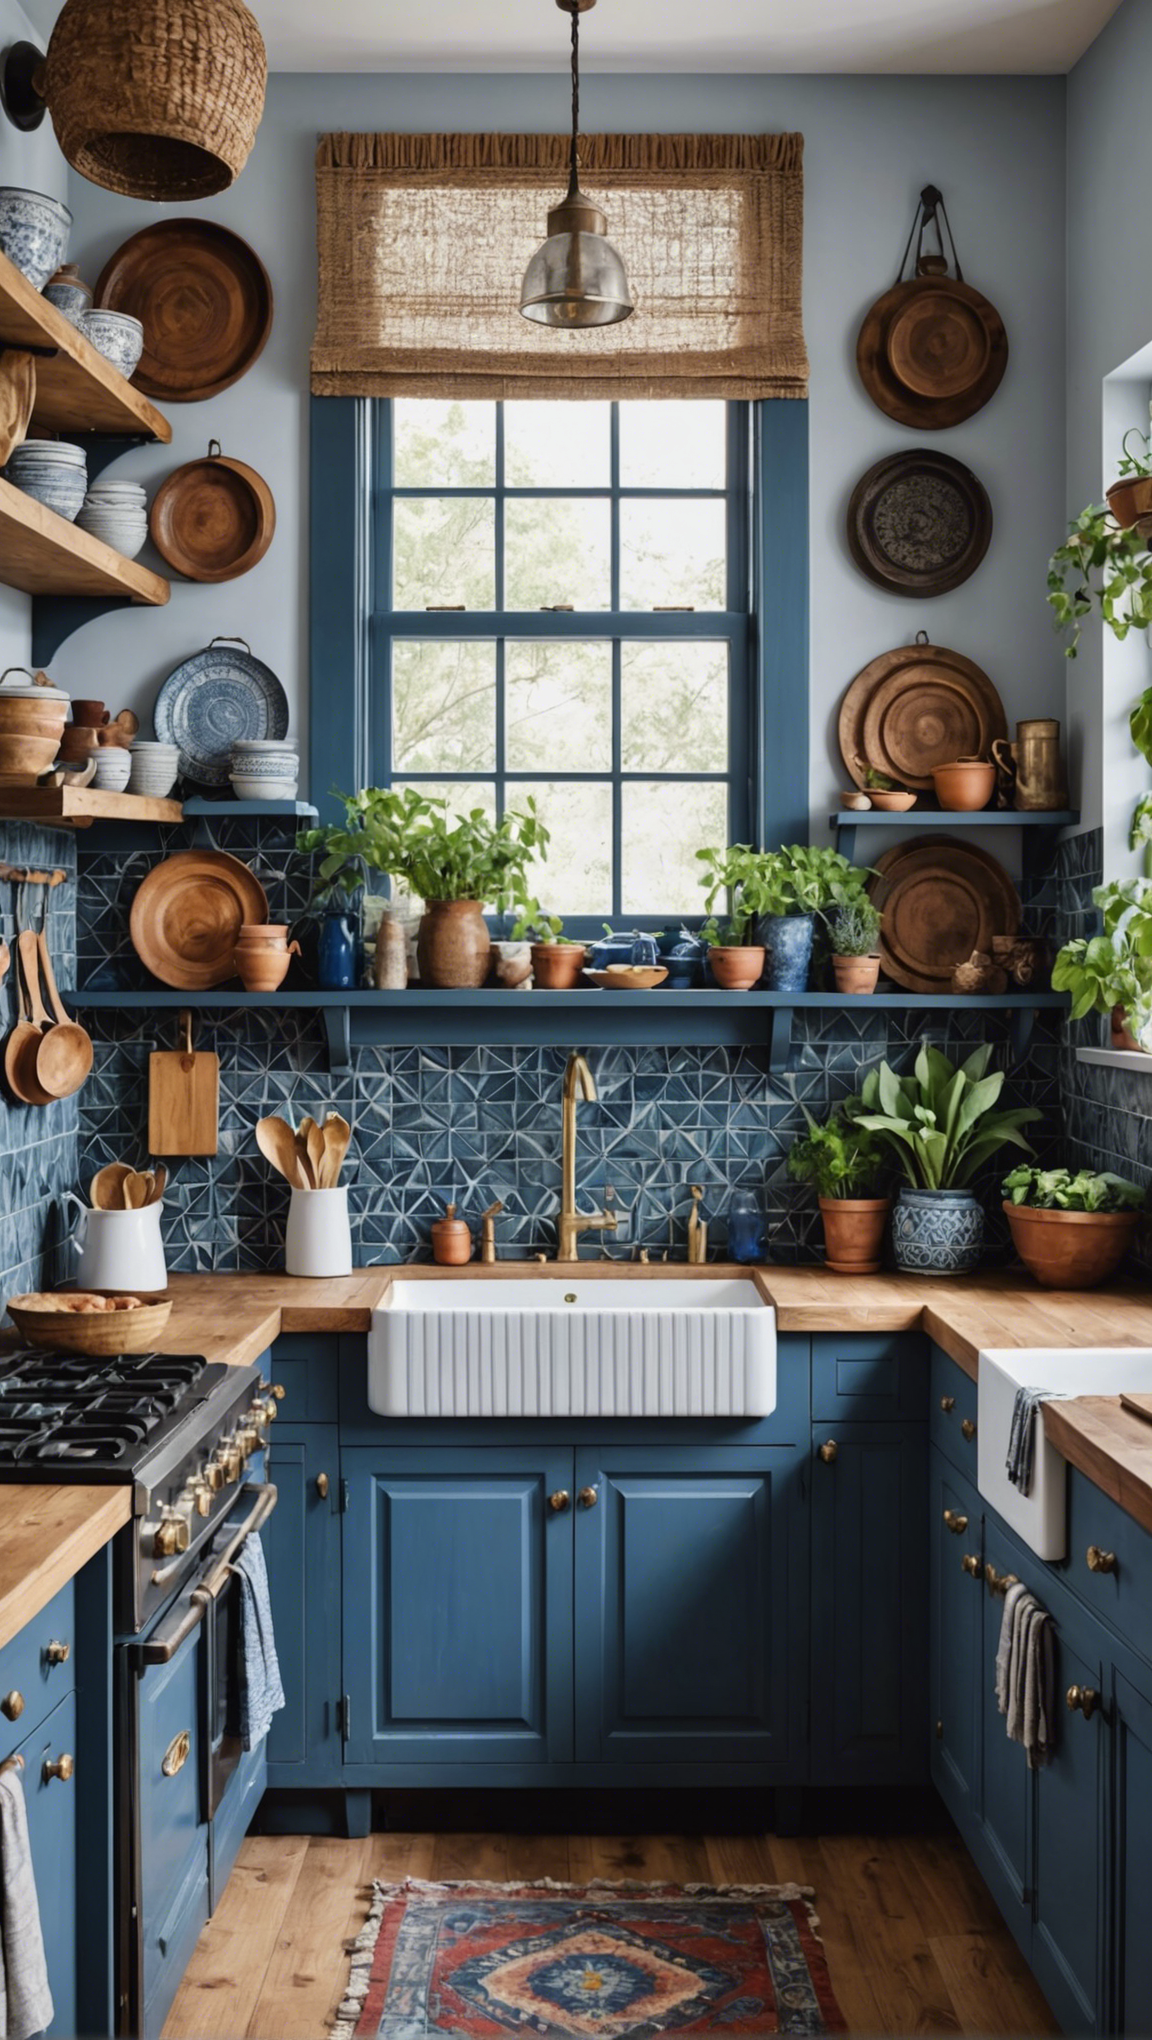 Boho Kitchen with Grey Accents: Embracing a Bohemian Aesthetic